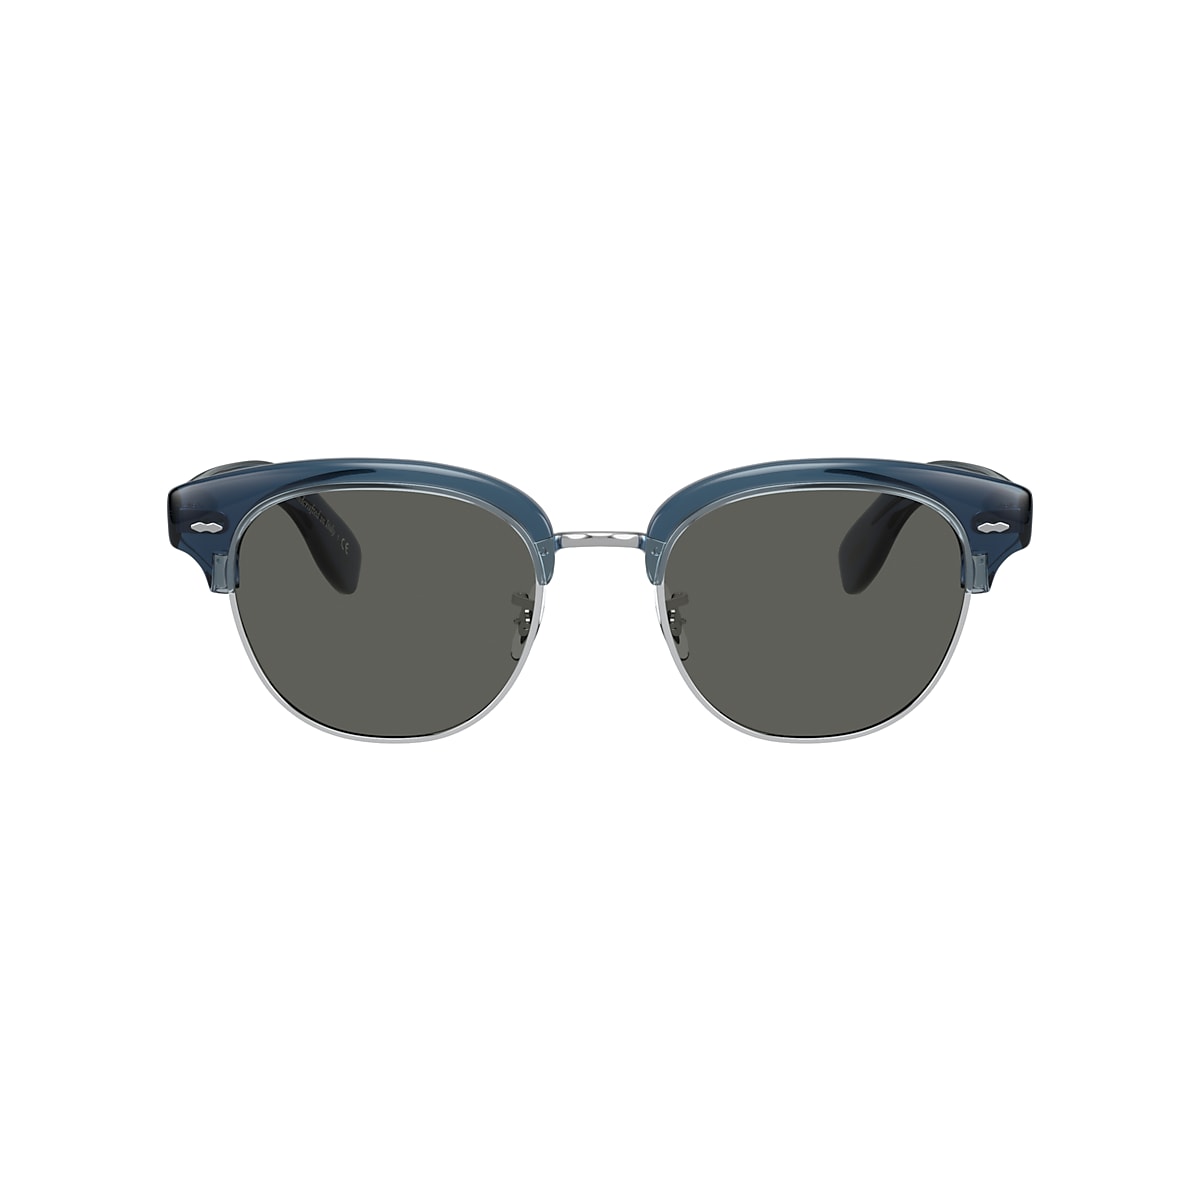 Oliver Cary Grant 2 Sun Sunglasses in Deep Blue | Oliver®